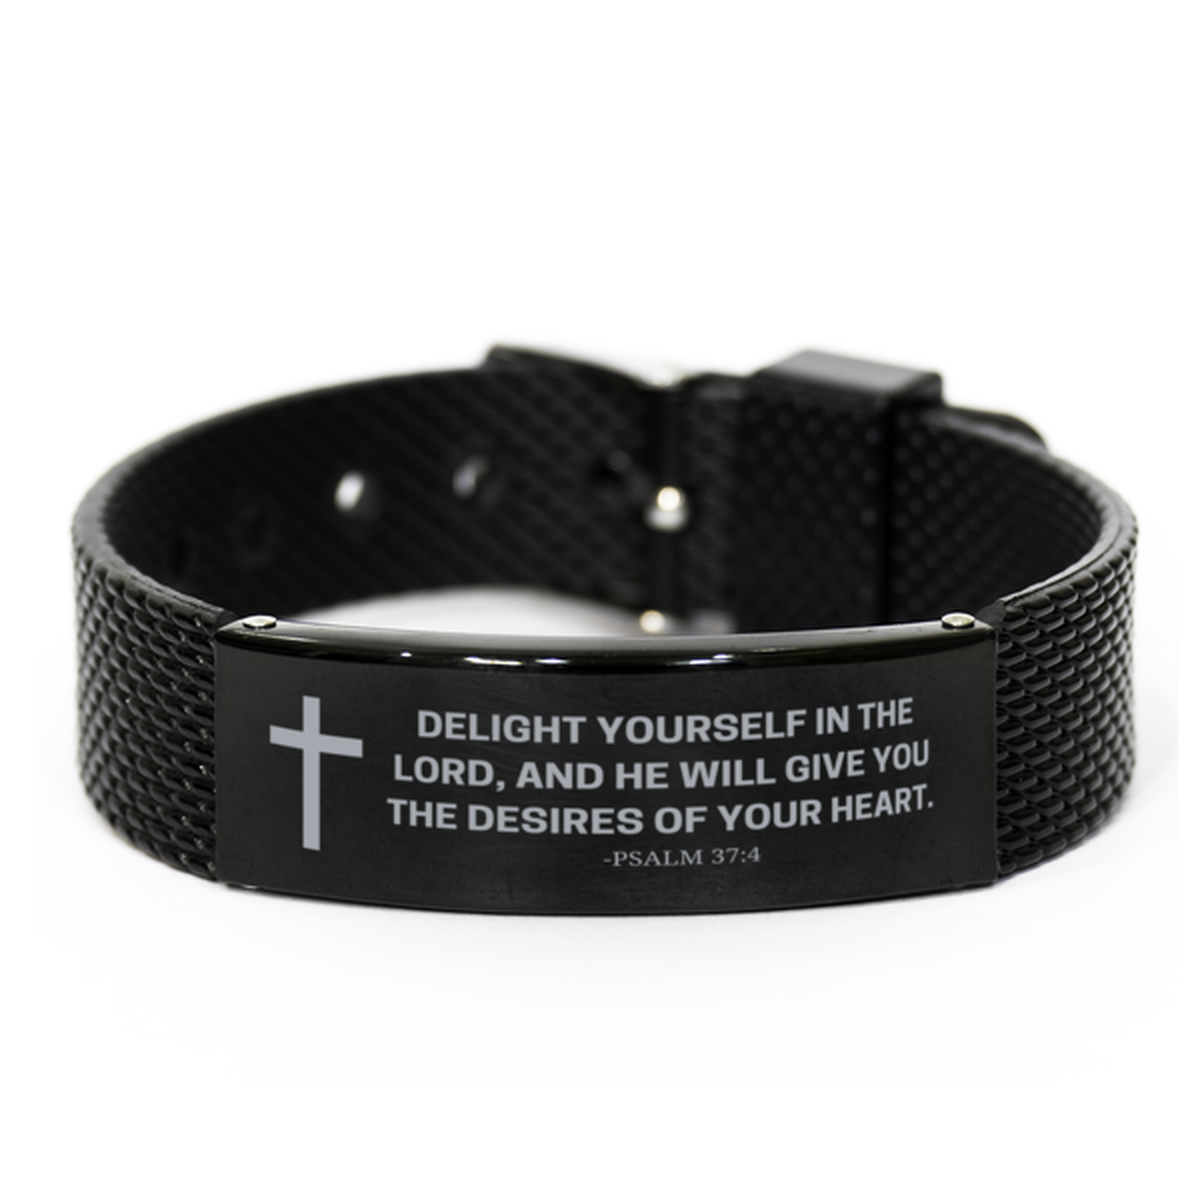 Baptism Gifts For Teenage Boys Girls, Christian Bible Verse Black Shark Mesh Bracelet, Delight yourself in the Lord, Catholic Confirmation Gifts for Son, Godson, Grandson, Nephew